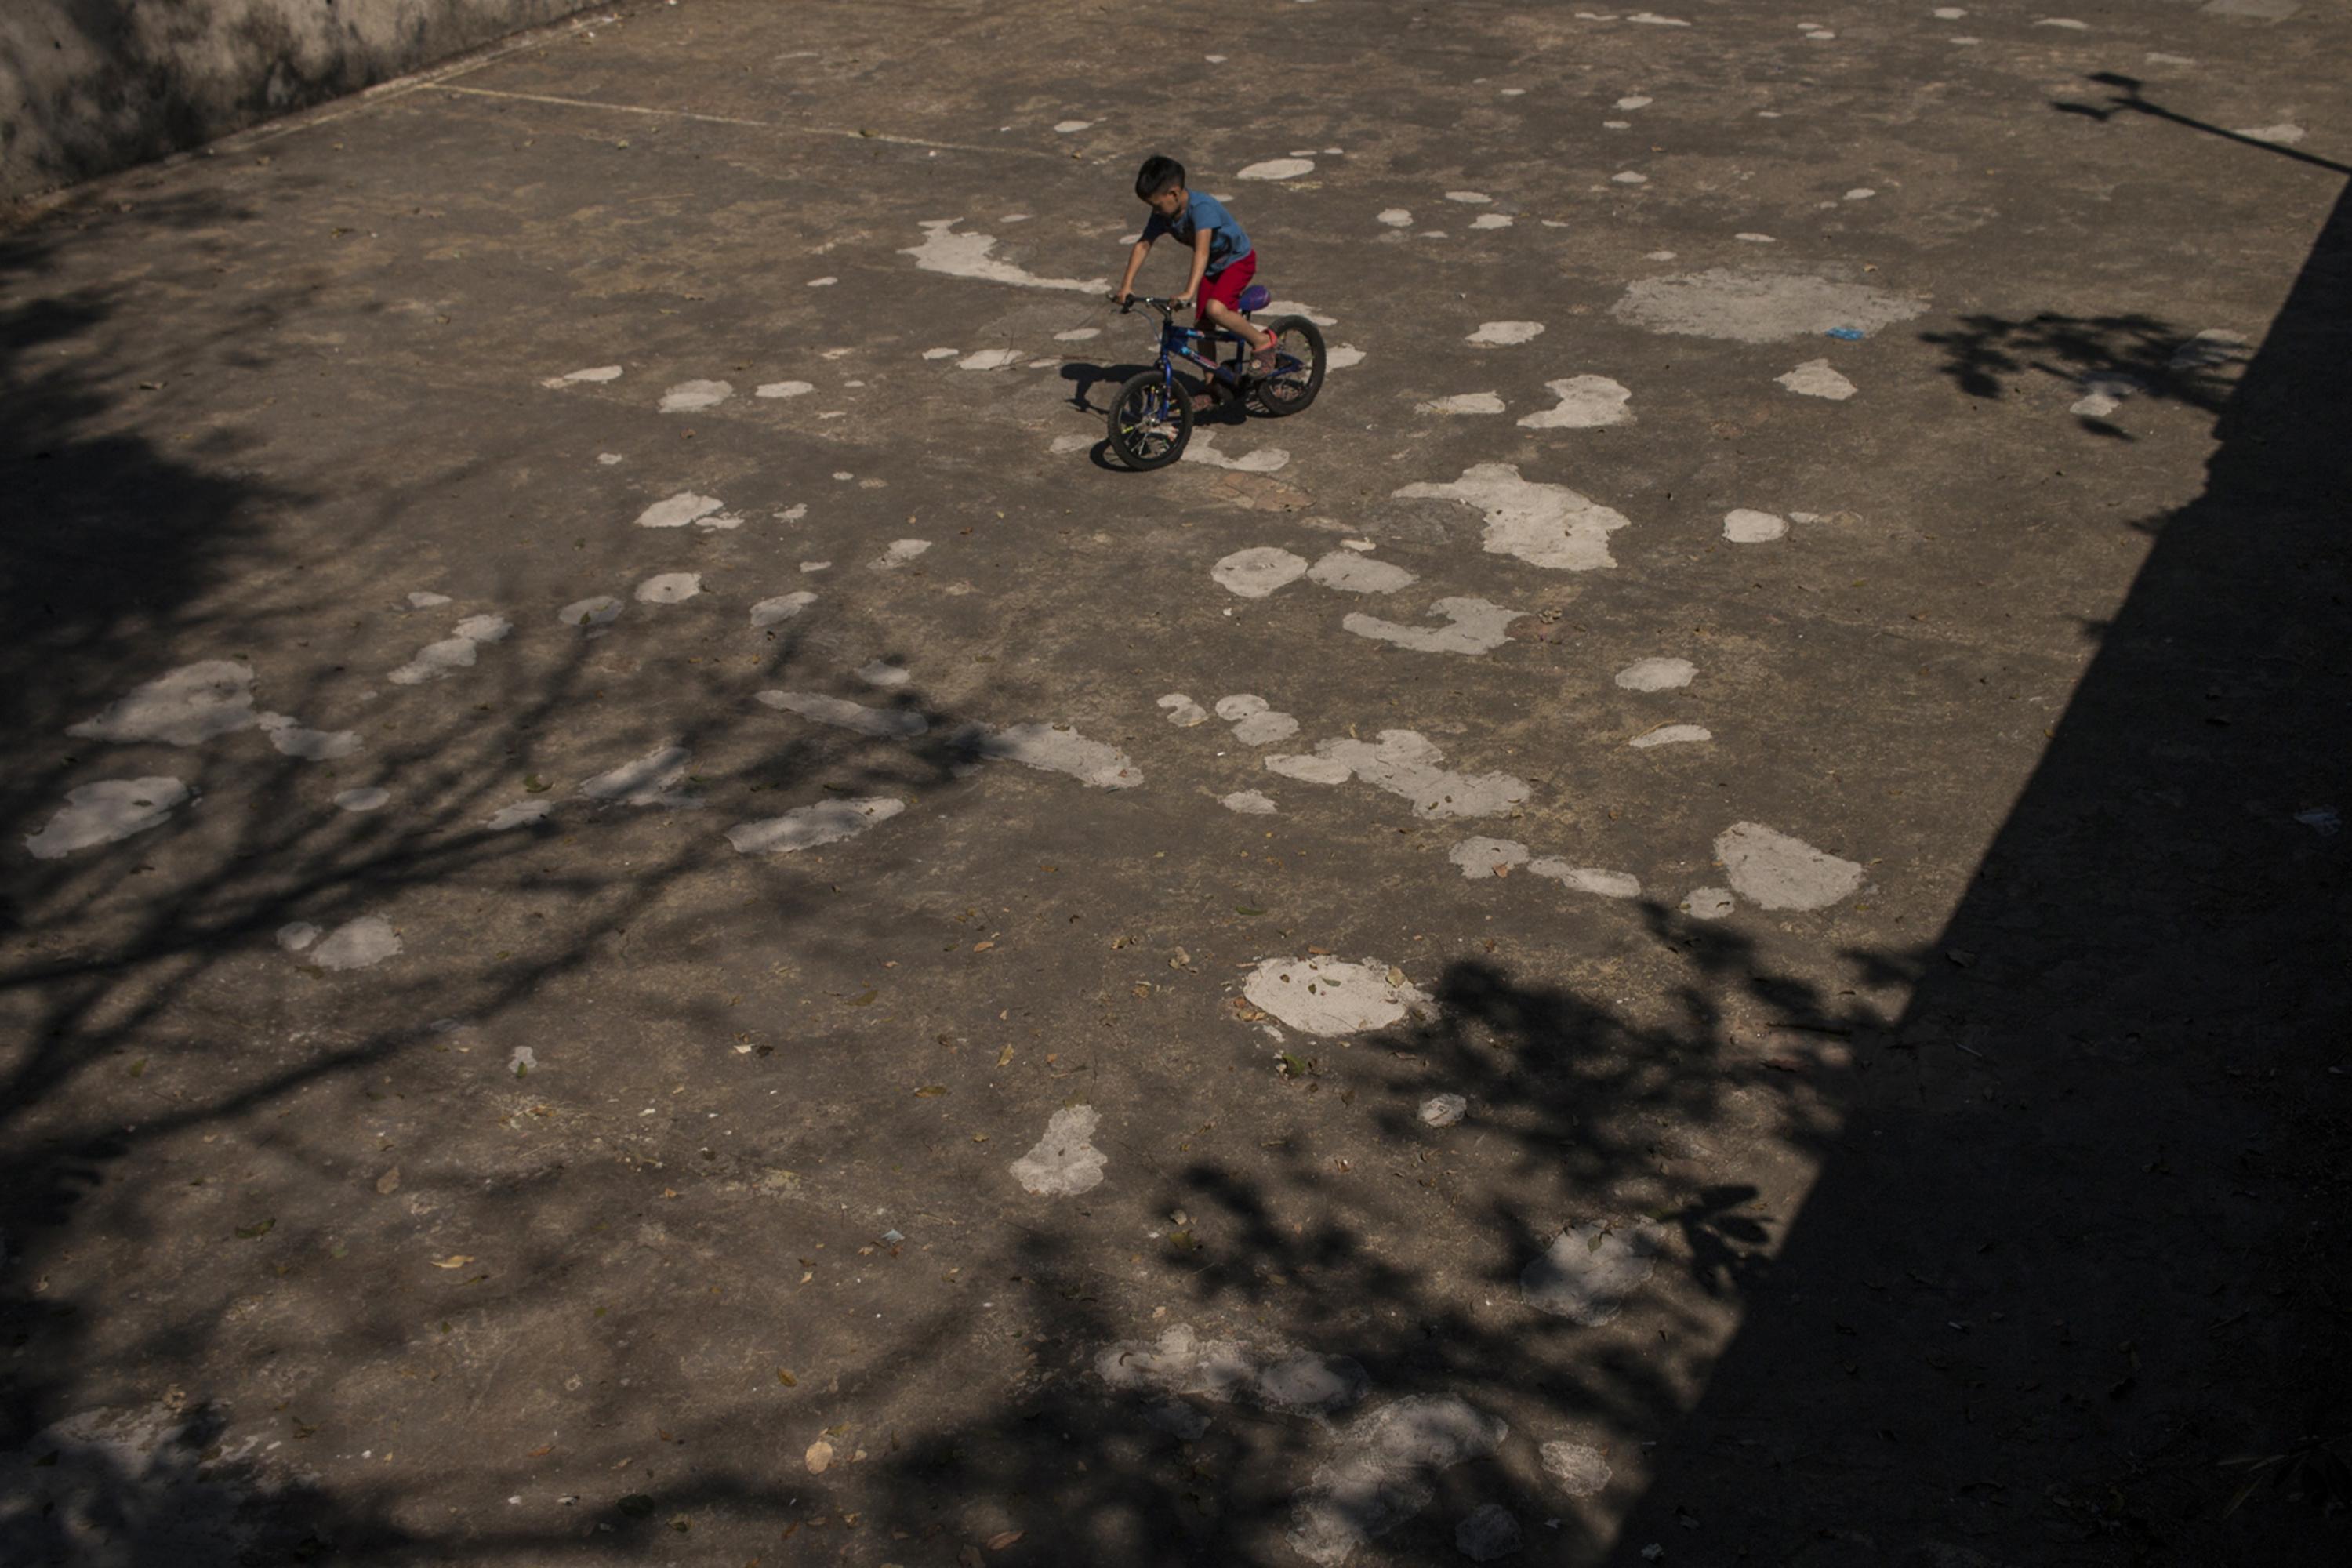 Enio Mauricio Ramírez, seven, plays in an empty water tank that La Labor Hacienda used to wash coffee. Spanning 25 by 15 meters, it used to be filled directly from the local water supply through a canal that stretched 300 meters. It was taken out of service in 2012 and now, in ruins, serves as a mini soccer field.